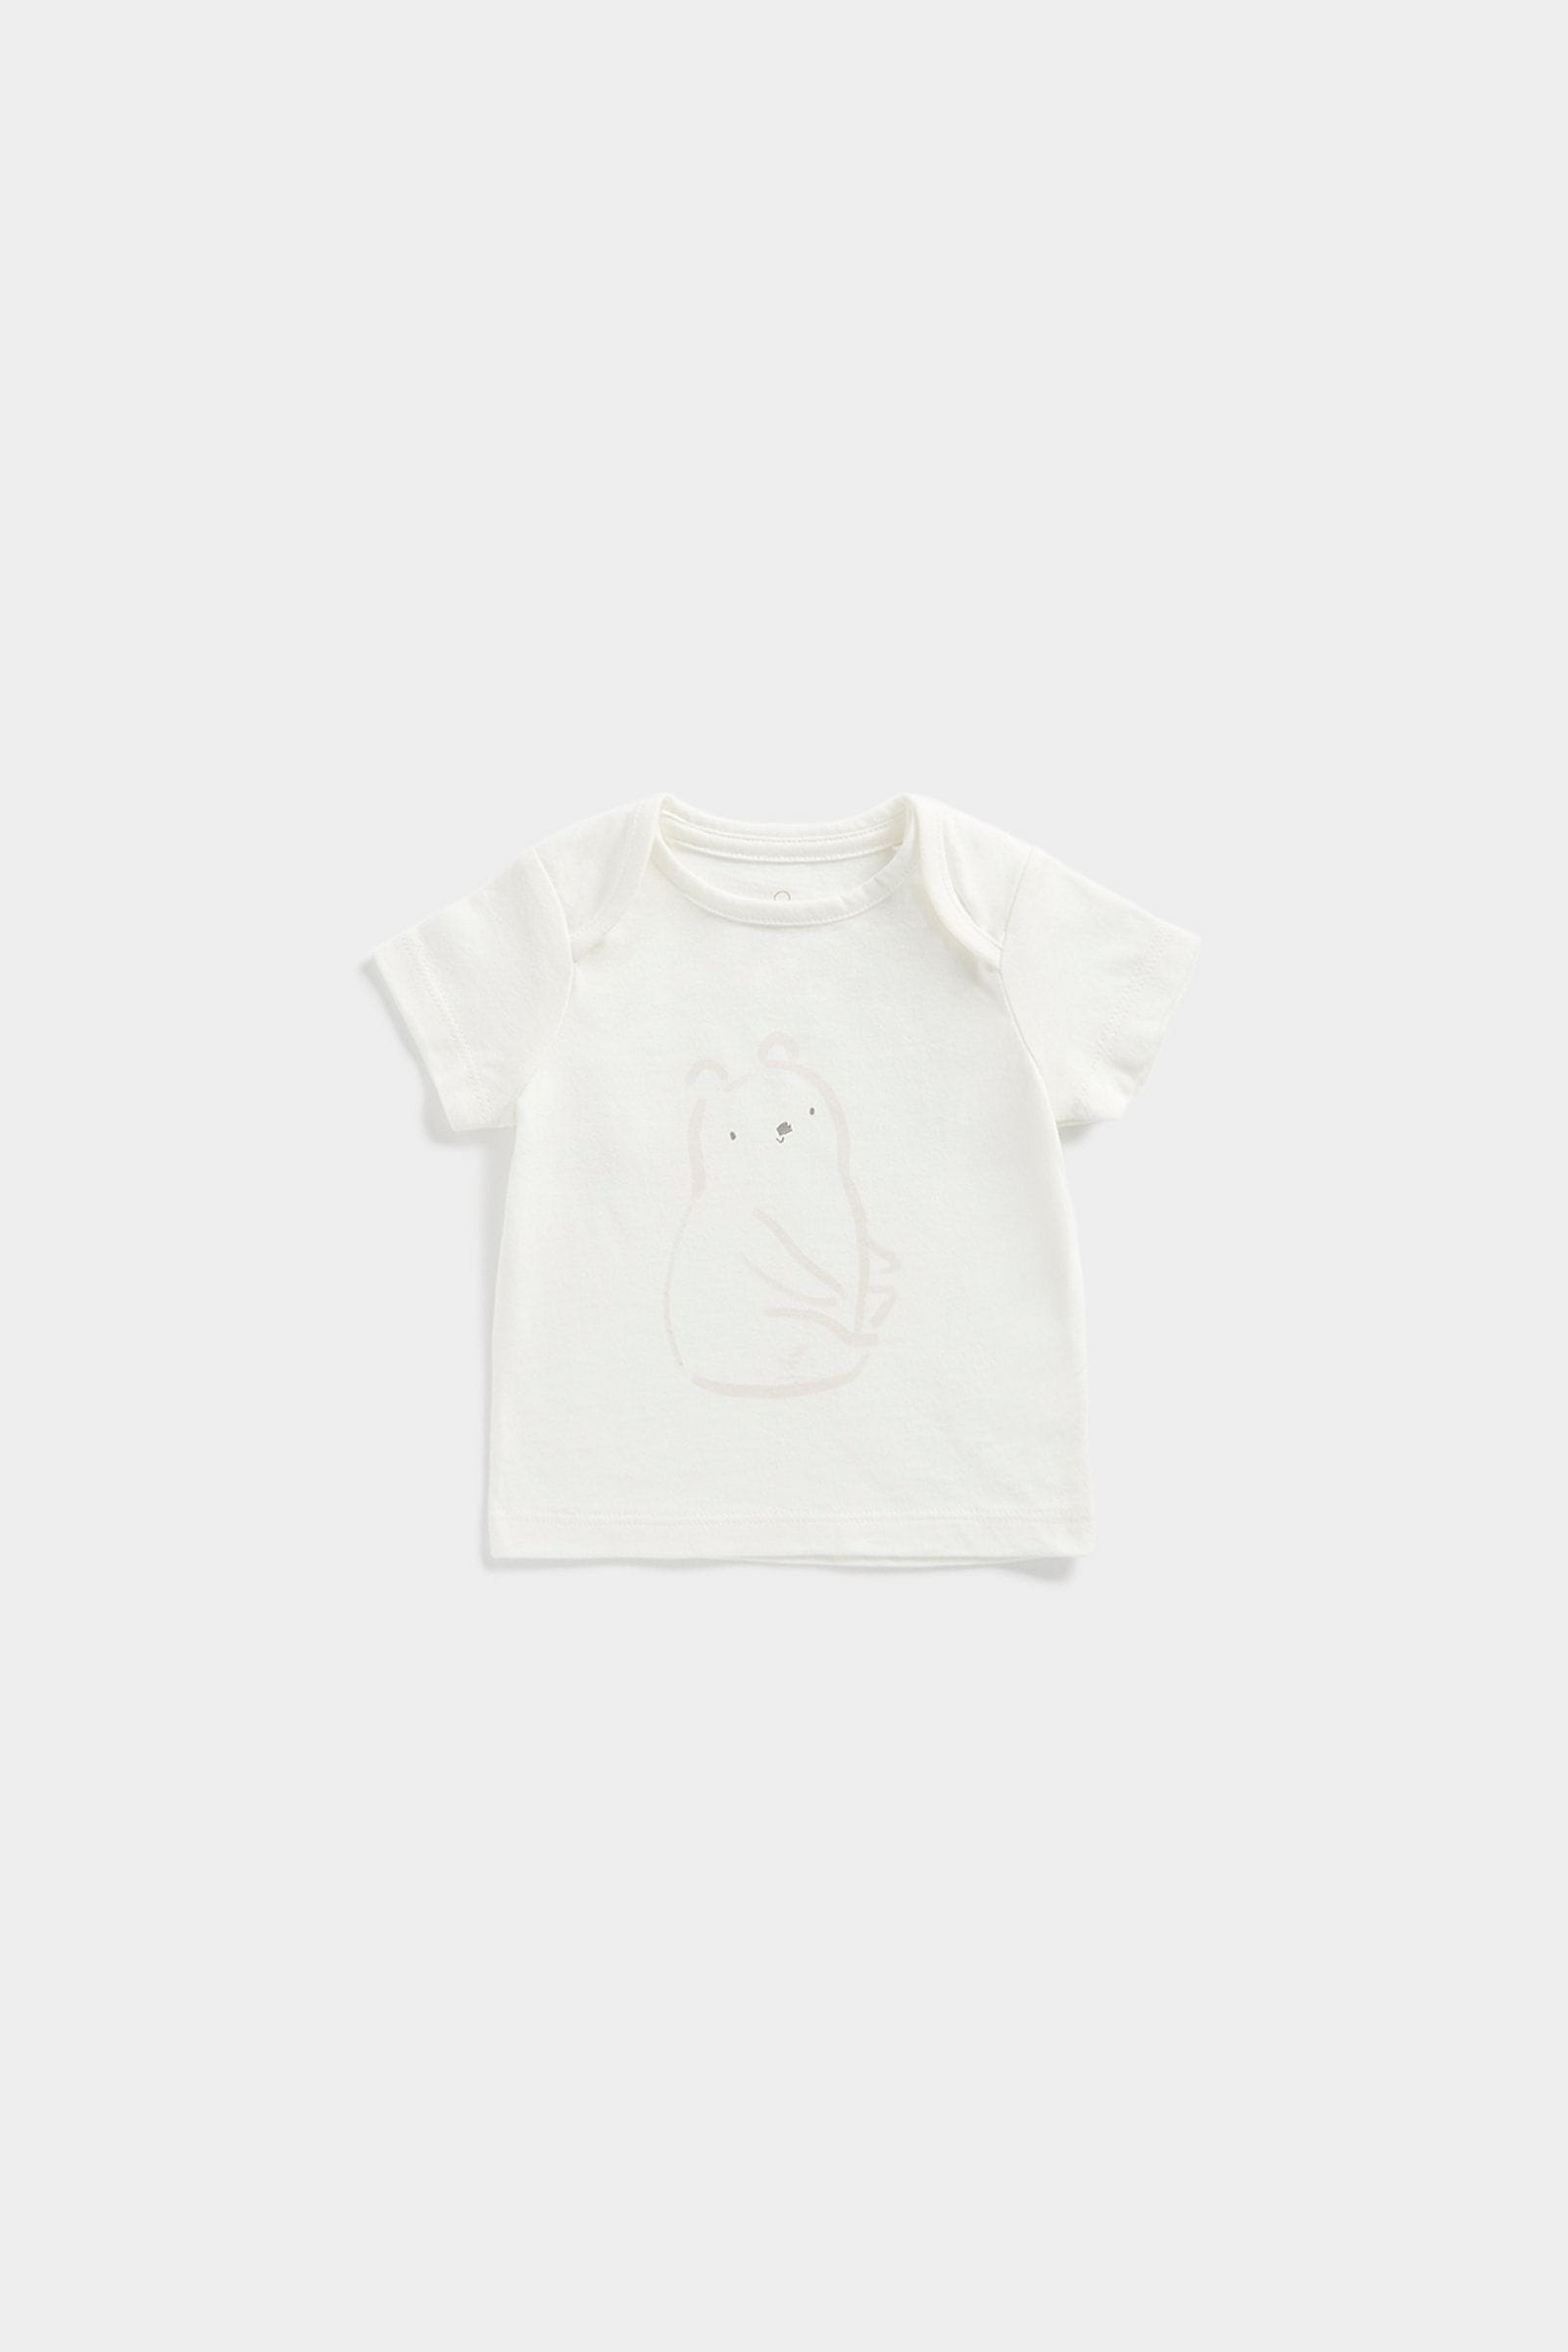 Mothercare | Mothercare Girls Half Sleeves My First Collection T-shirt -Cream 0